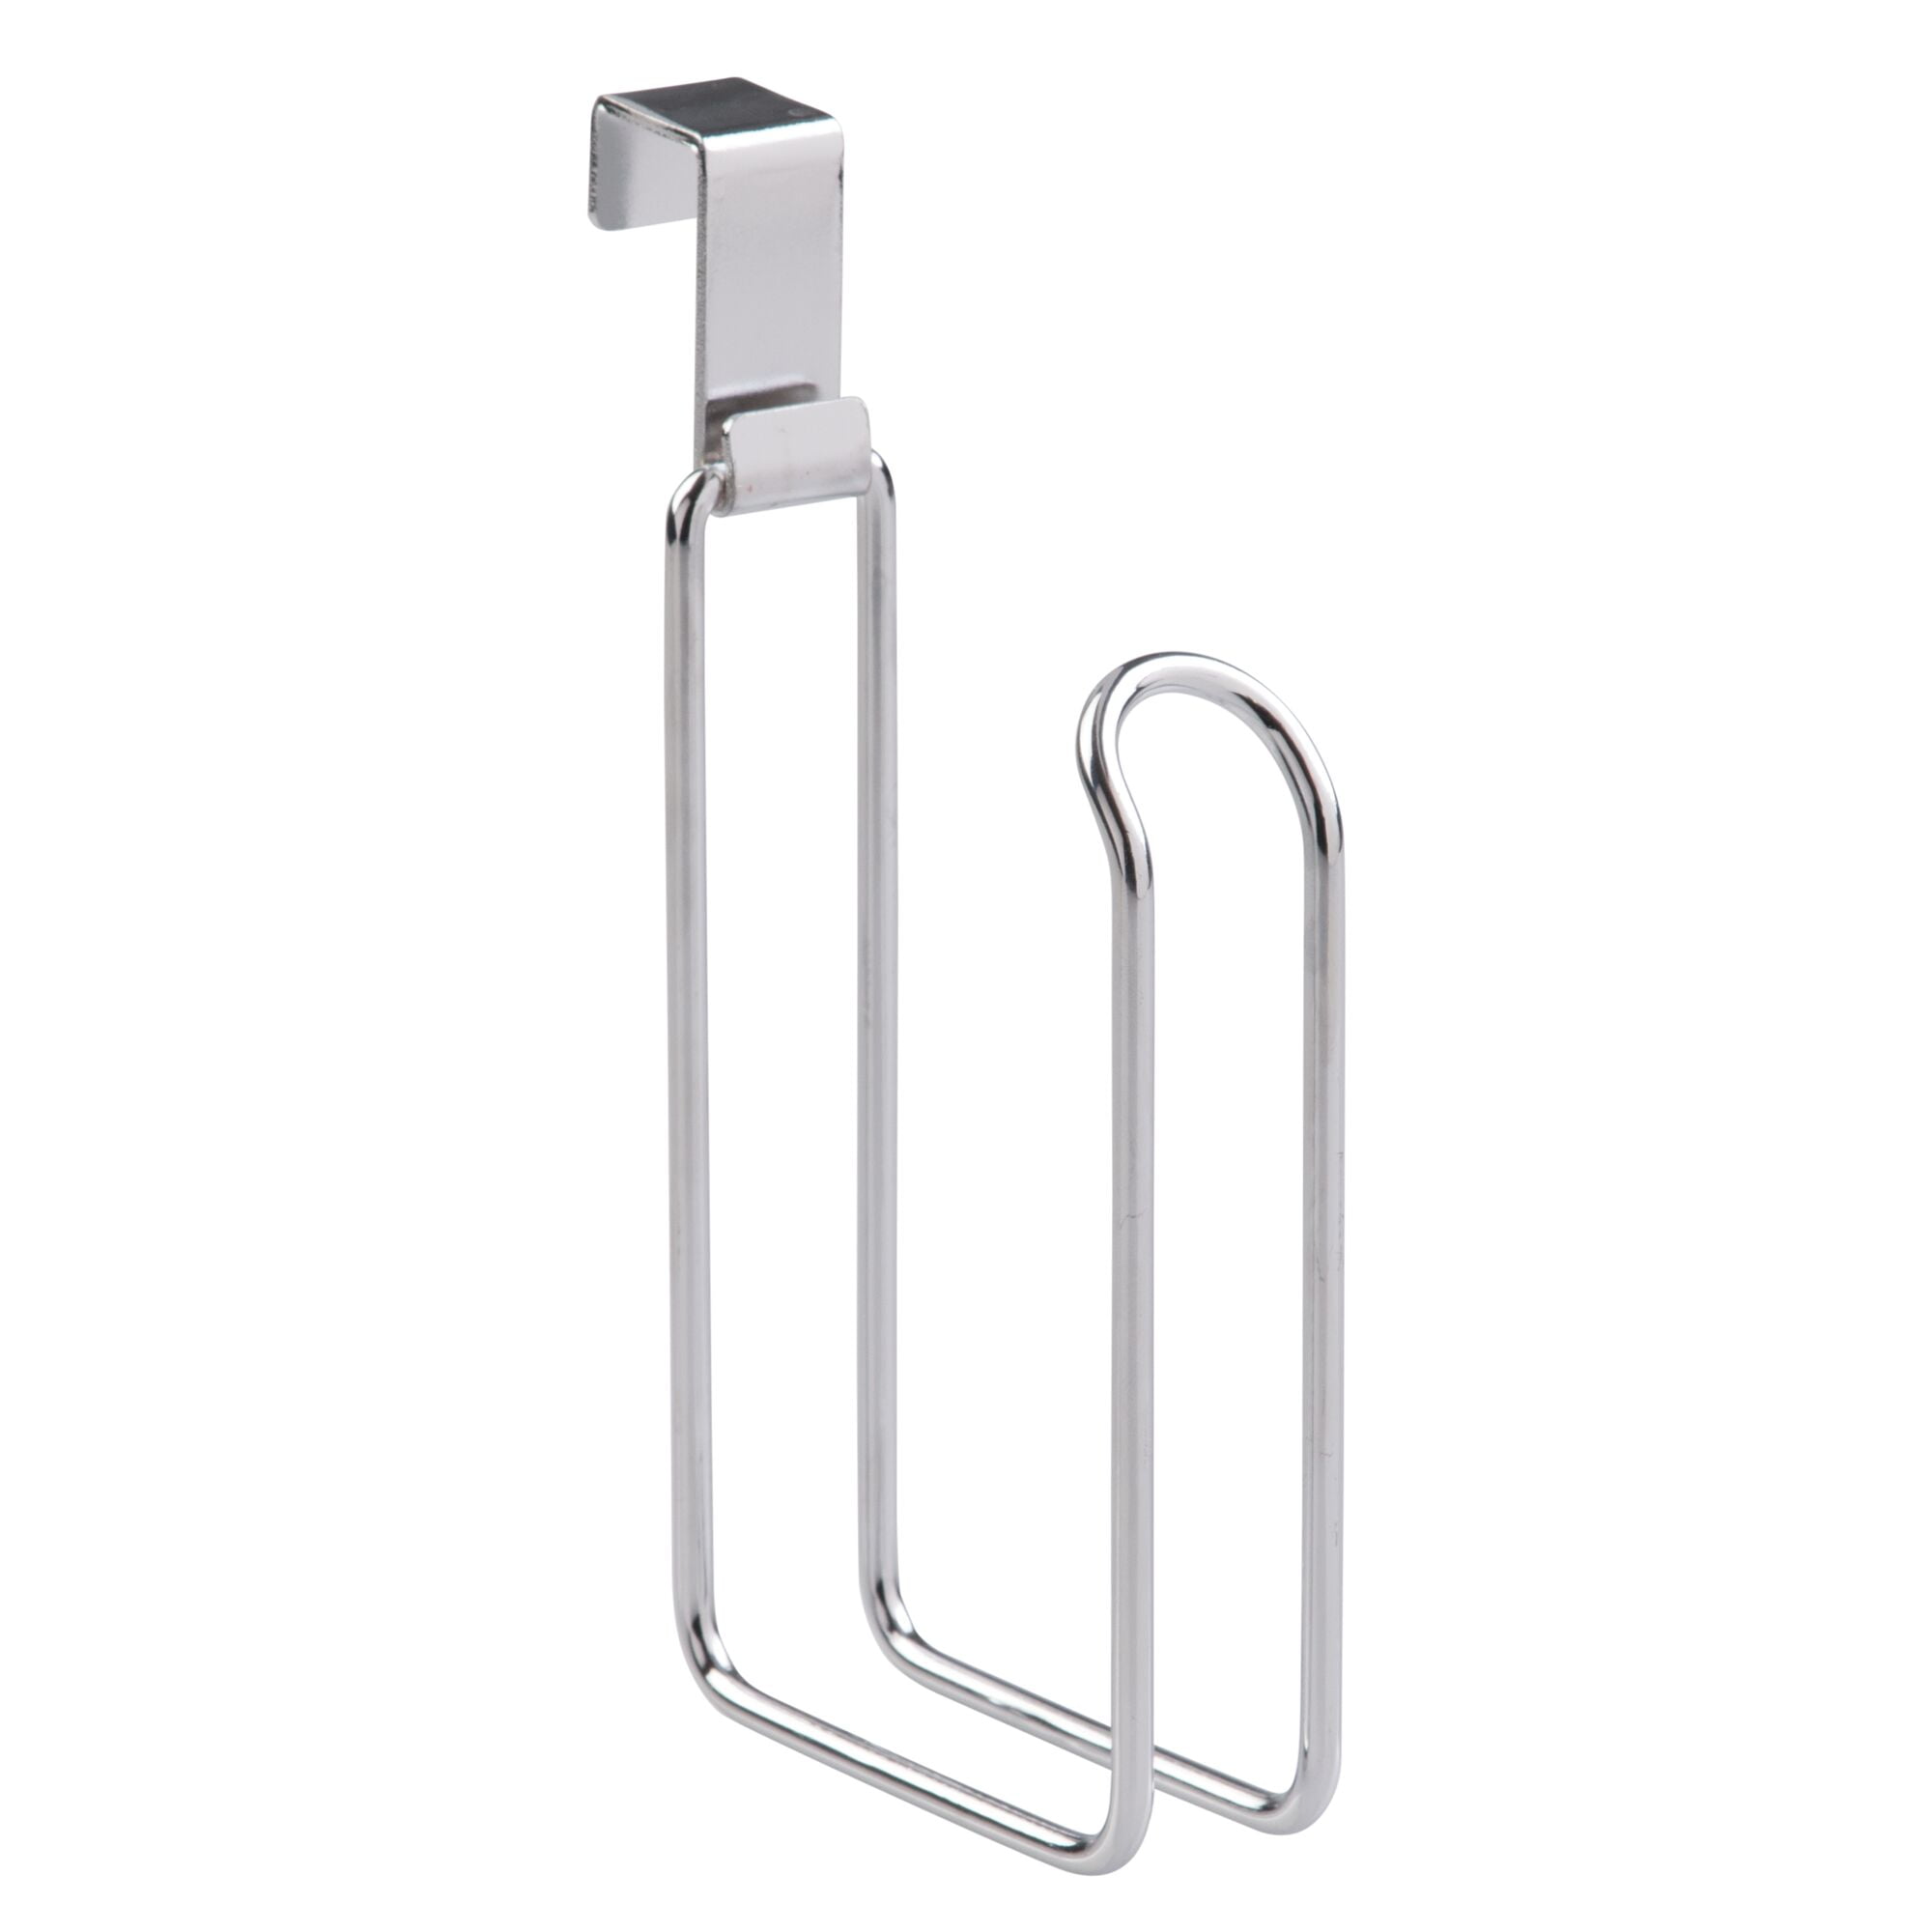 Mainstays Chrome Over-the-Tank Toilet Paper Holder, 7.5" x 4.5" x 1.25"